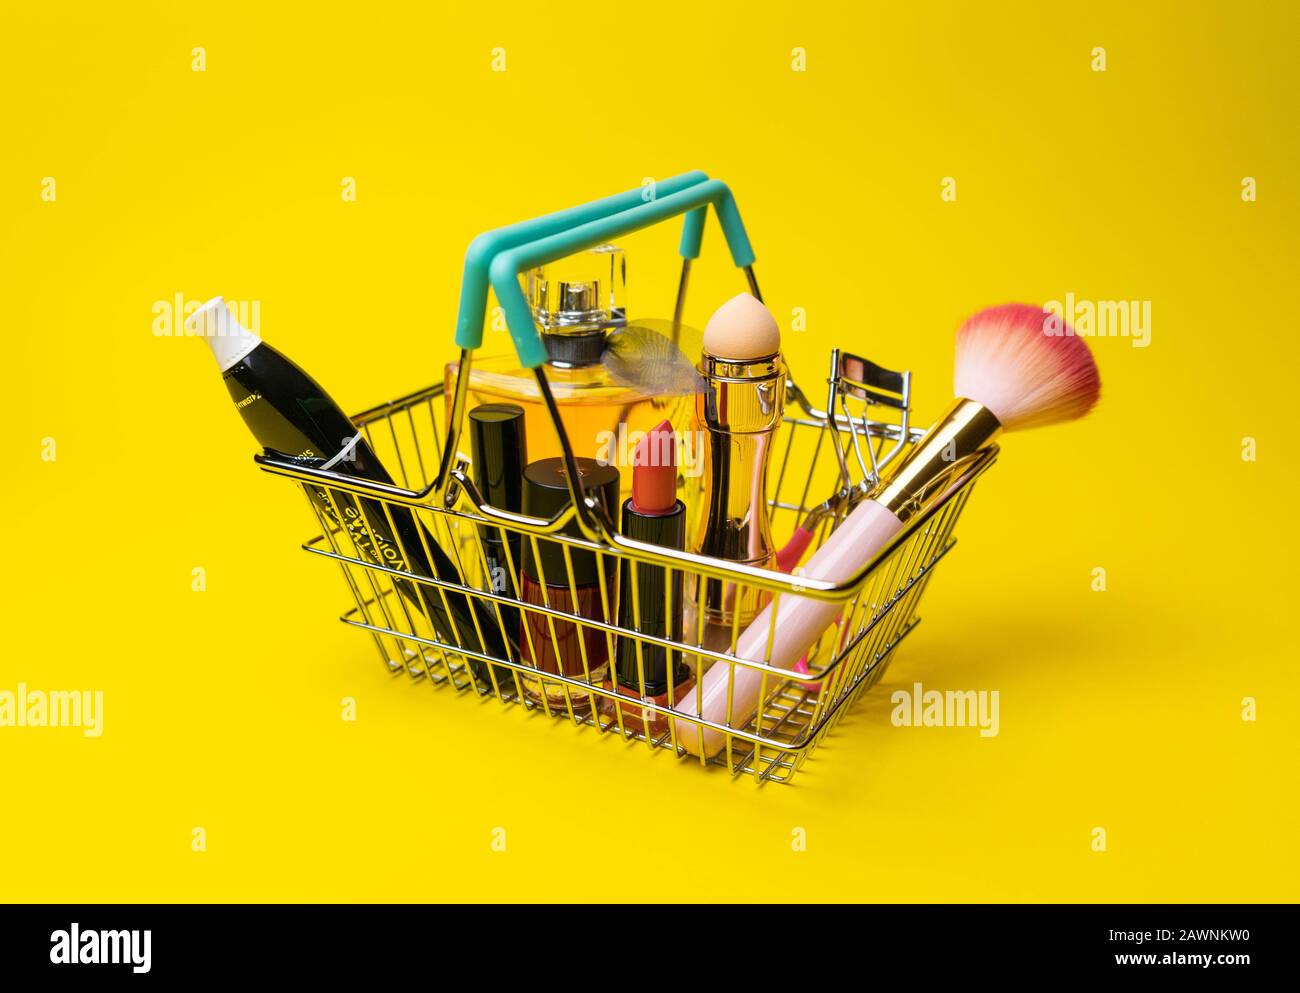 Makeup products fondant, mascara, perfume, brush, with cosmetic bag shopping cart on color background Stock Photo